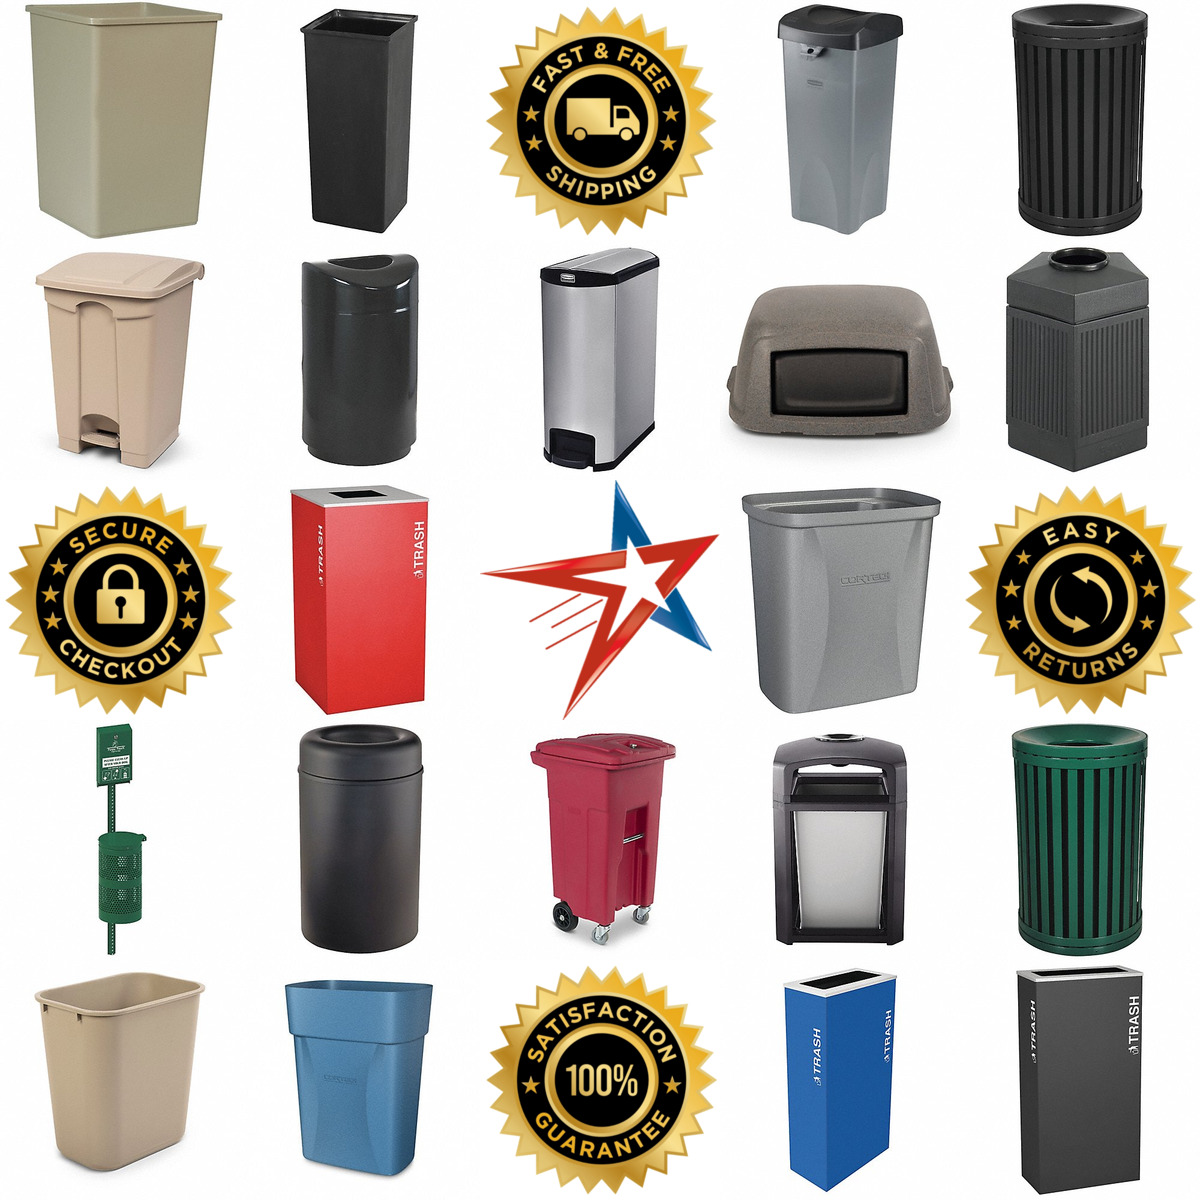 A selection of Trash Cans products on GoVets